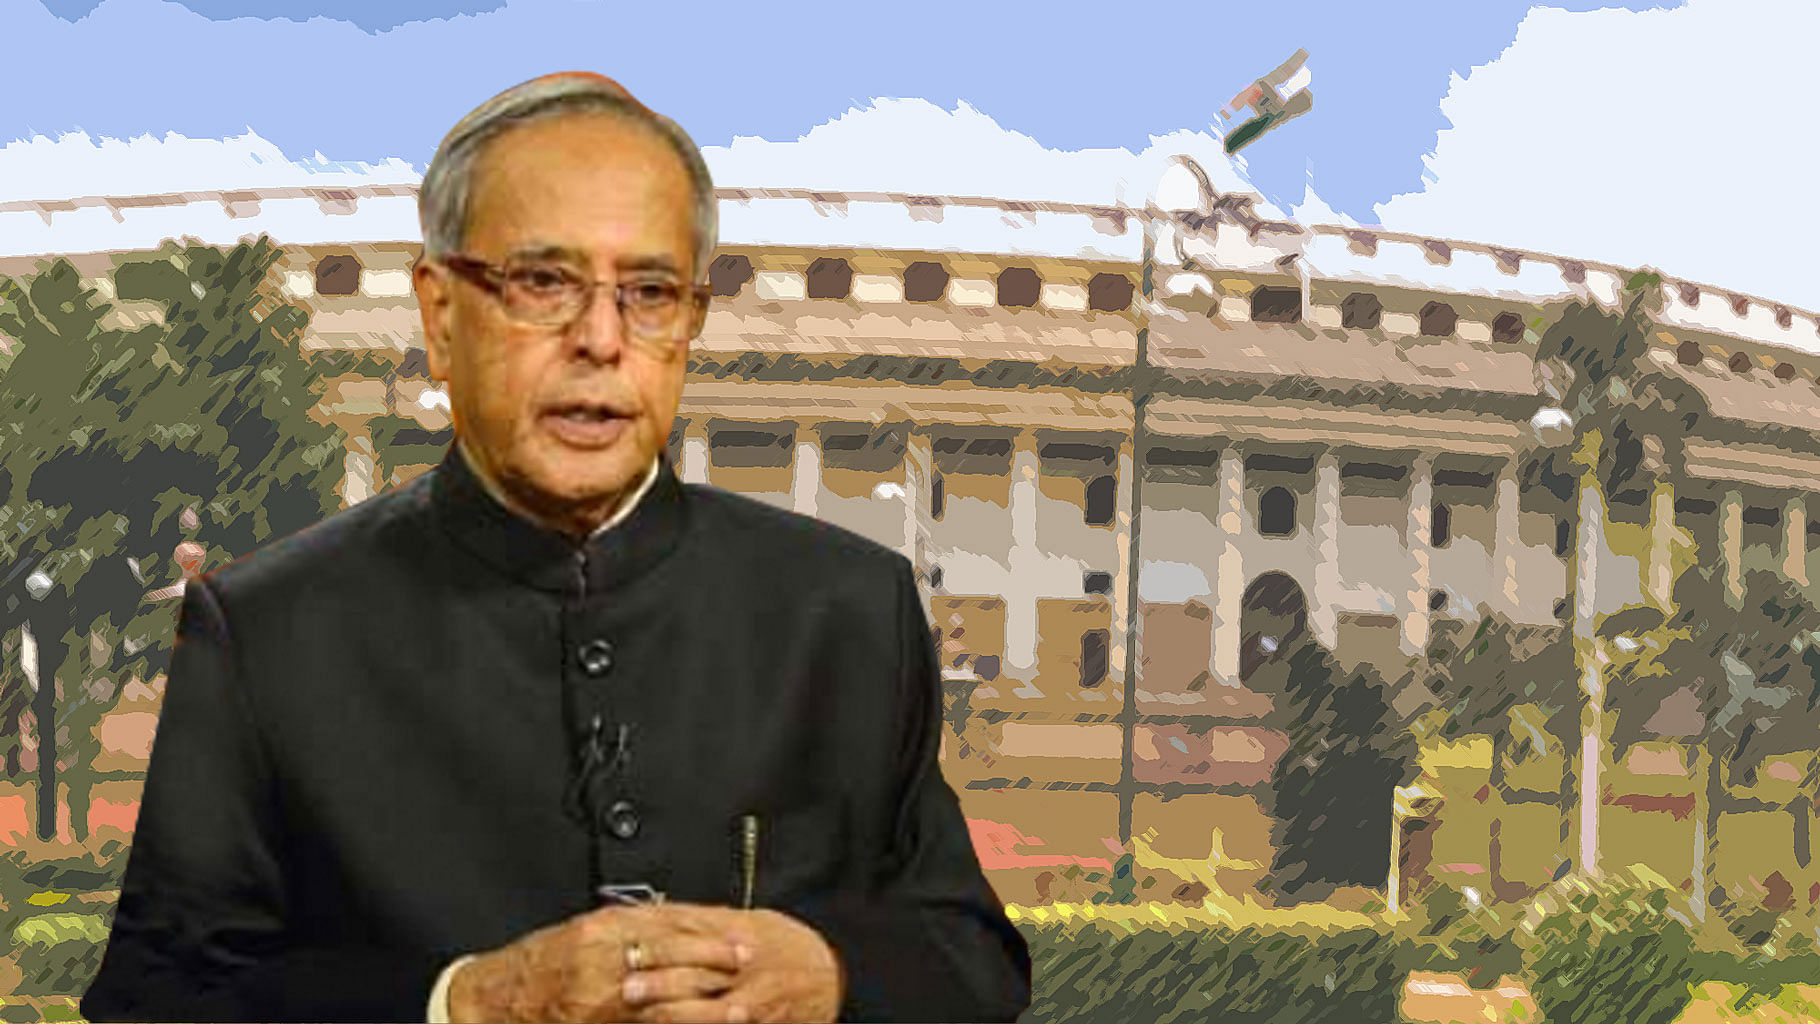 Pranab Mukherjee is yet to sign the decree that will impose President’s rule in Arunachal Pradesh. (Photo: <b>The Quint</b>)